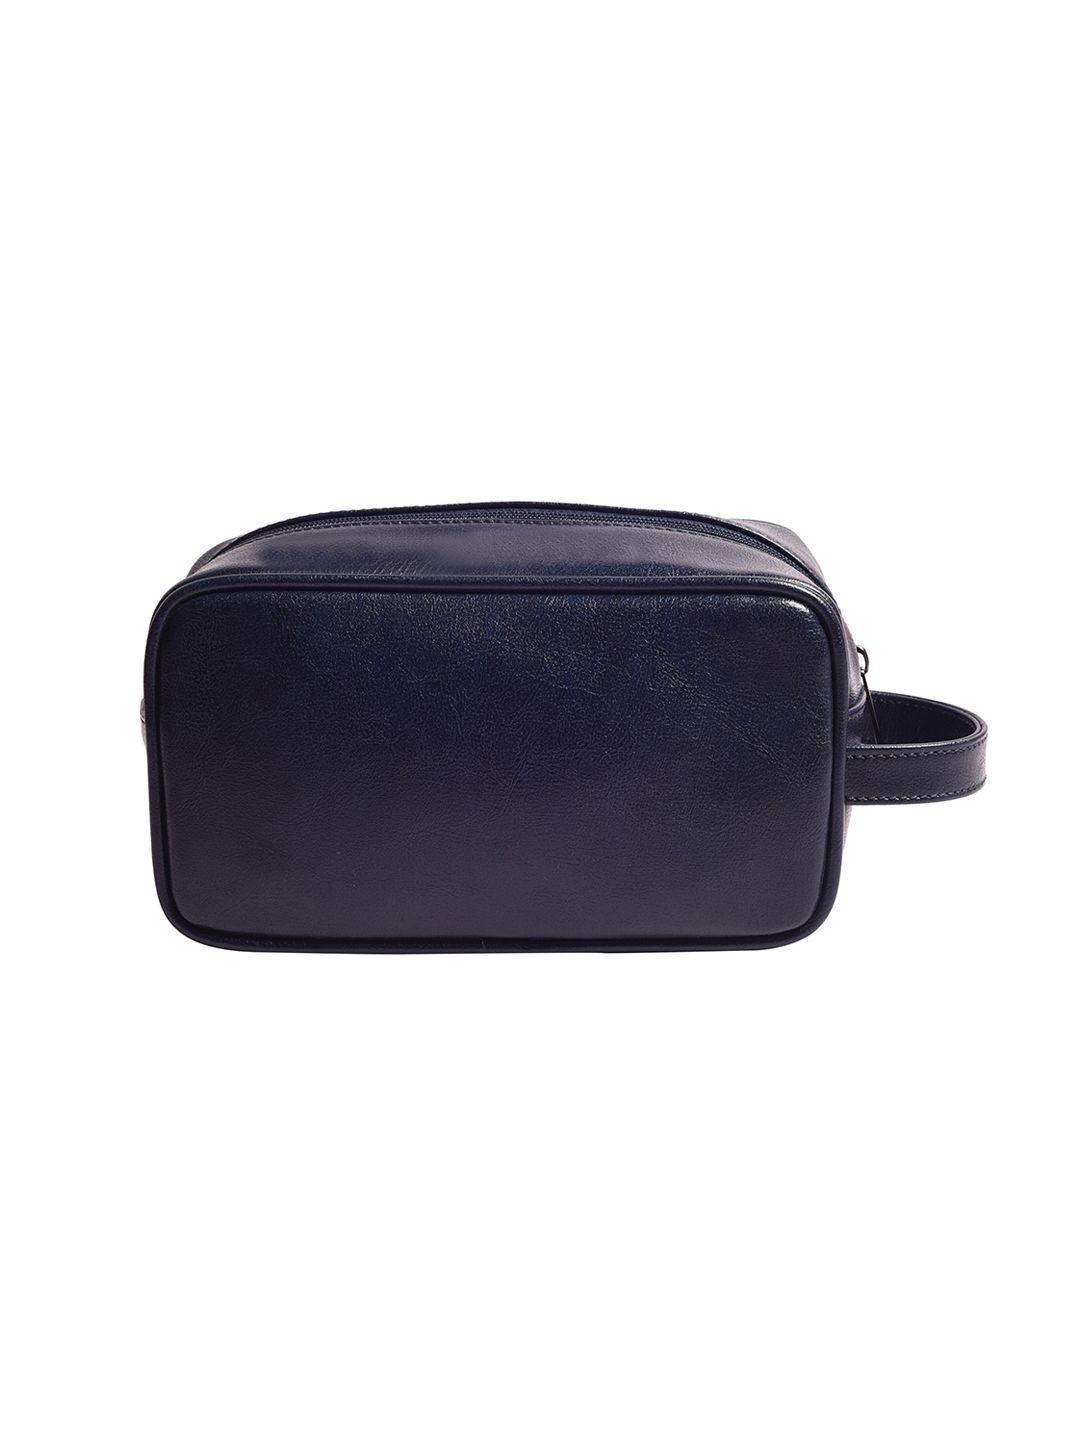 gauge machine navy blue multipurpose pouch with front zipper